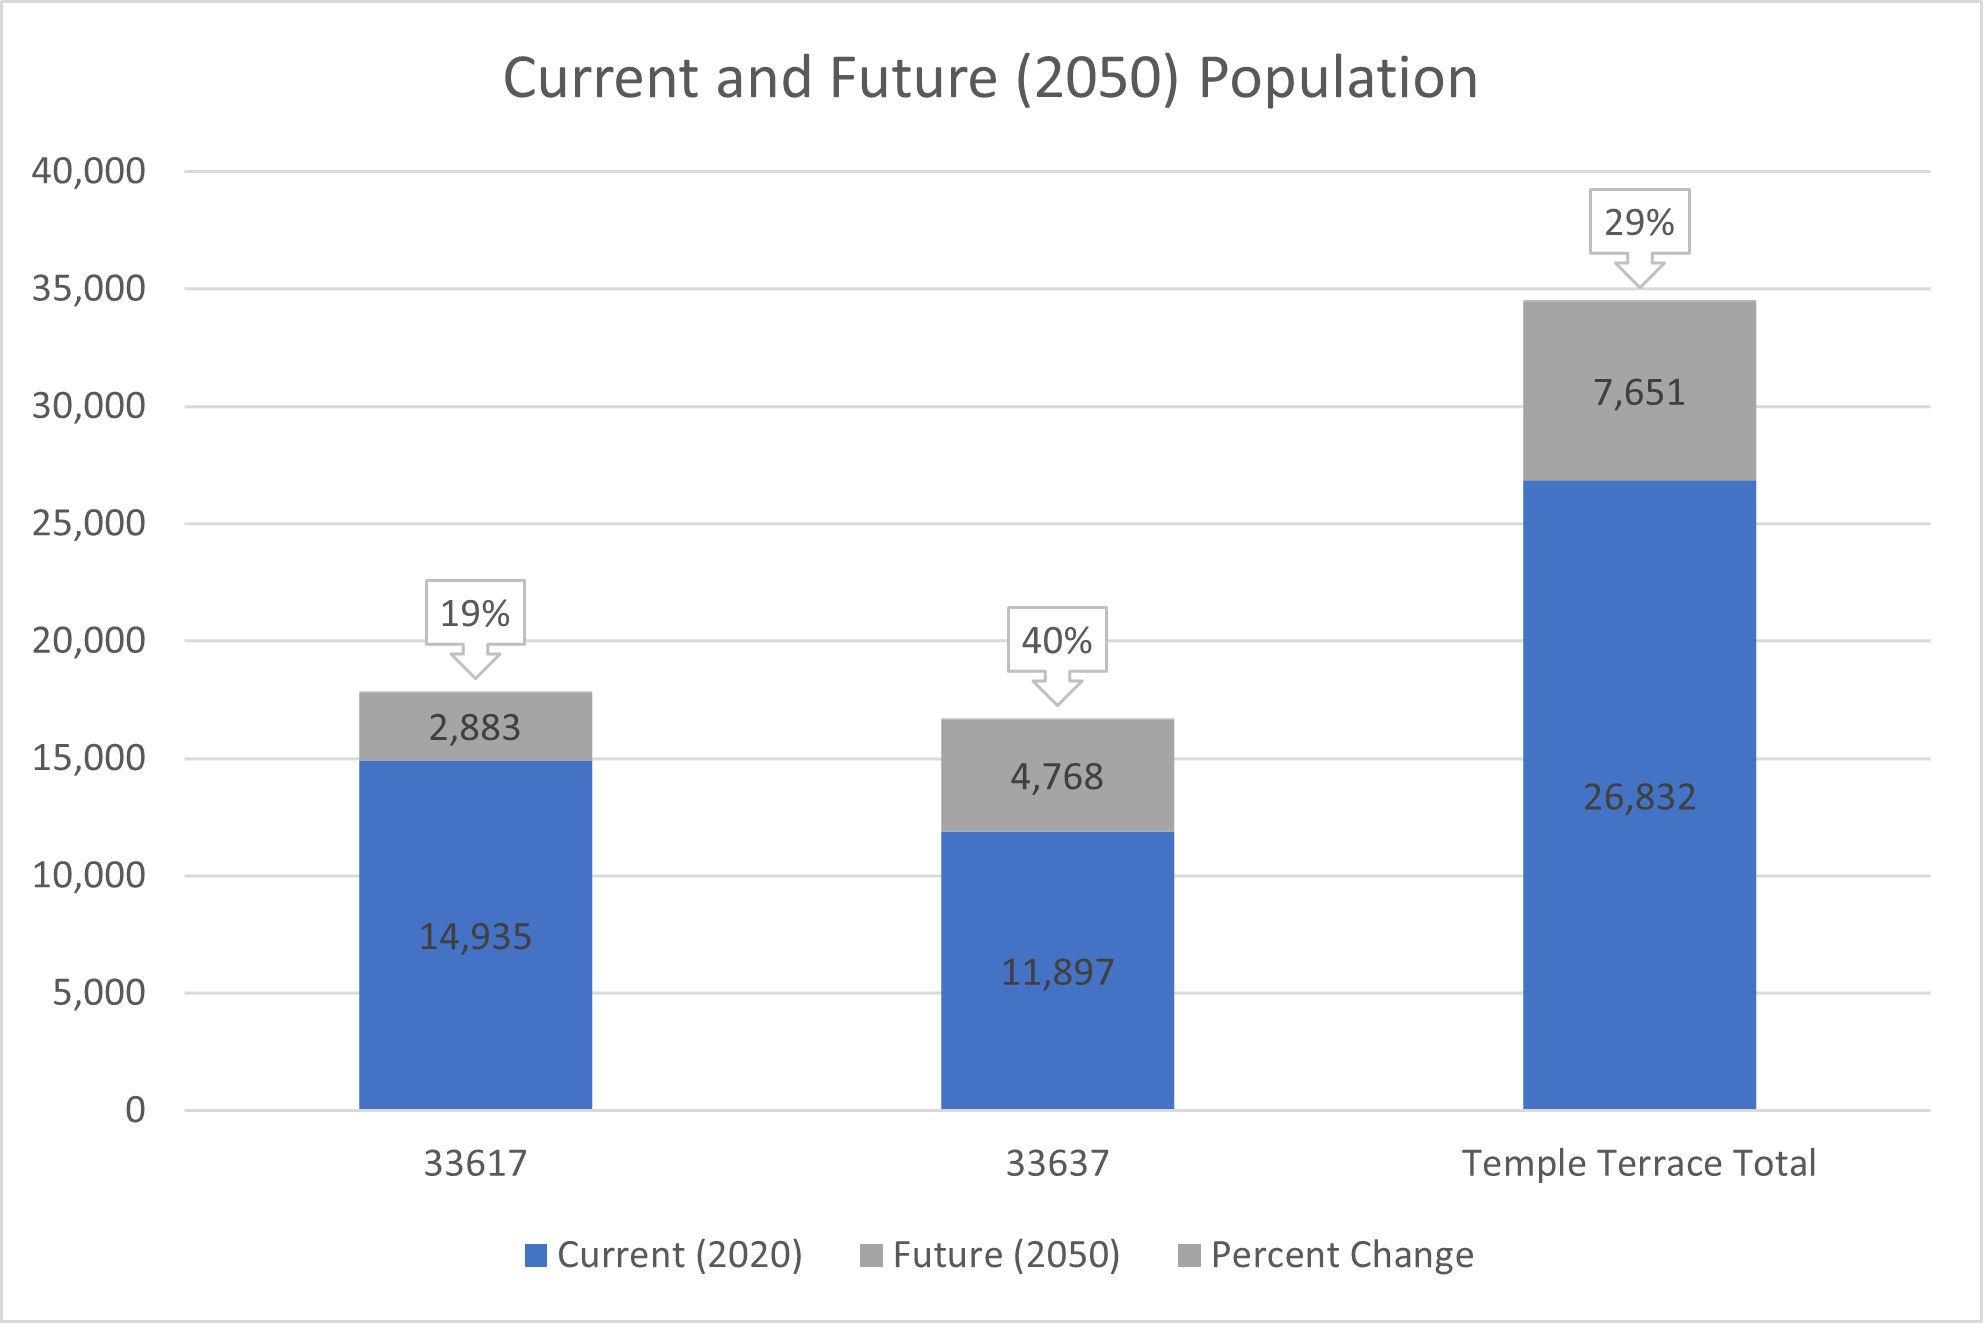 This bar chart shows current and future population for Temple Terrace and the two ZIP Codes partially within. ZIP Code 33617 will receive 4,142 new jobs (48% higher than 2020). ZIP Code 33637 will receive 7,606 new jobs (60% higher than 2020). Combined, Temple Terrace will receive 11,748 (55% higher than 2020).